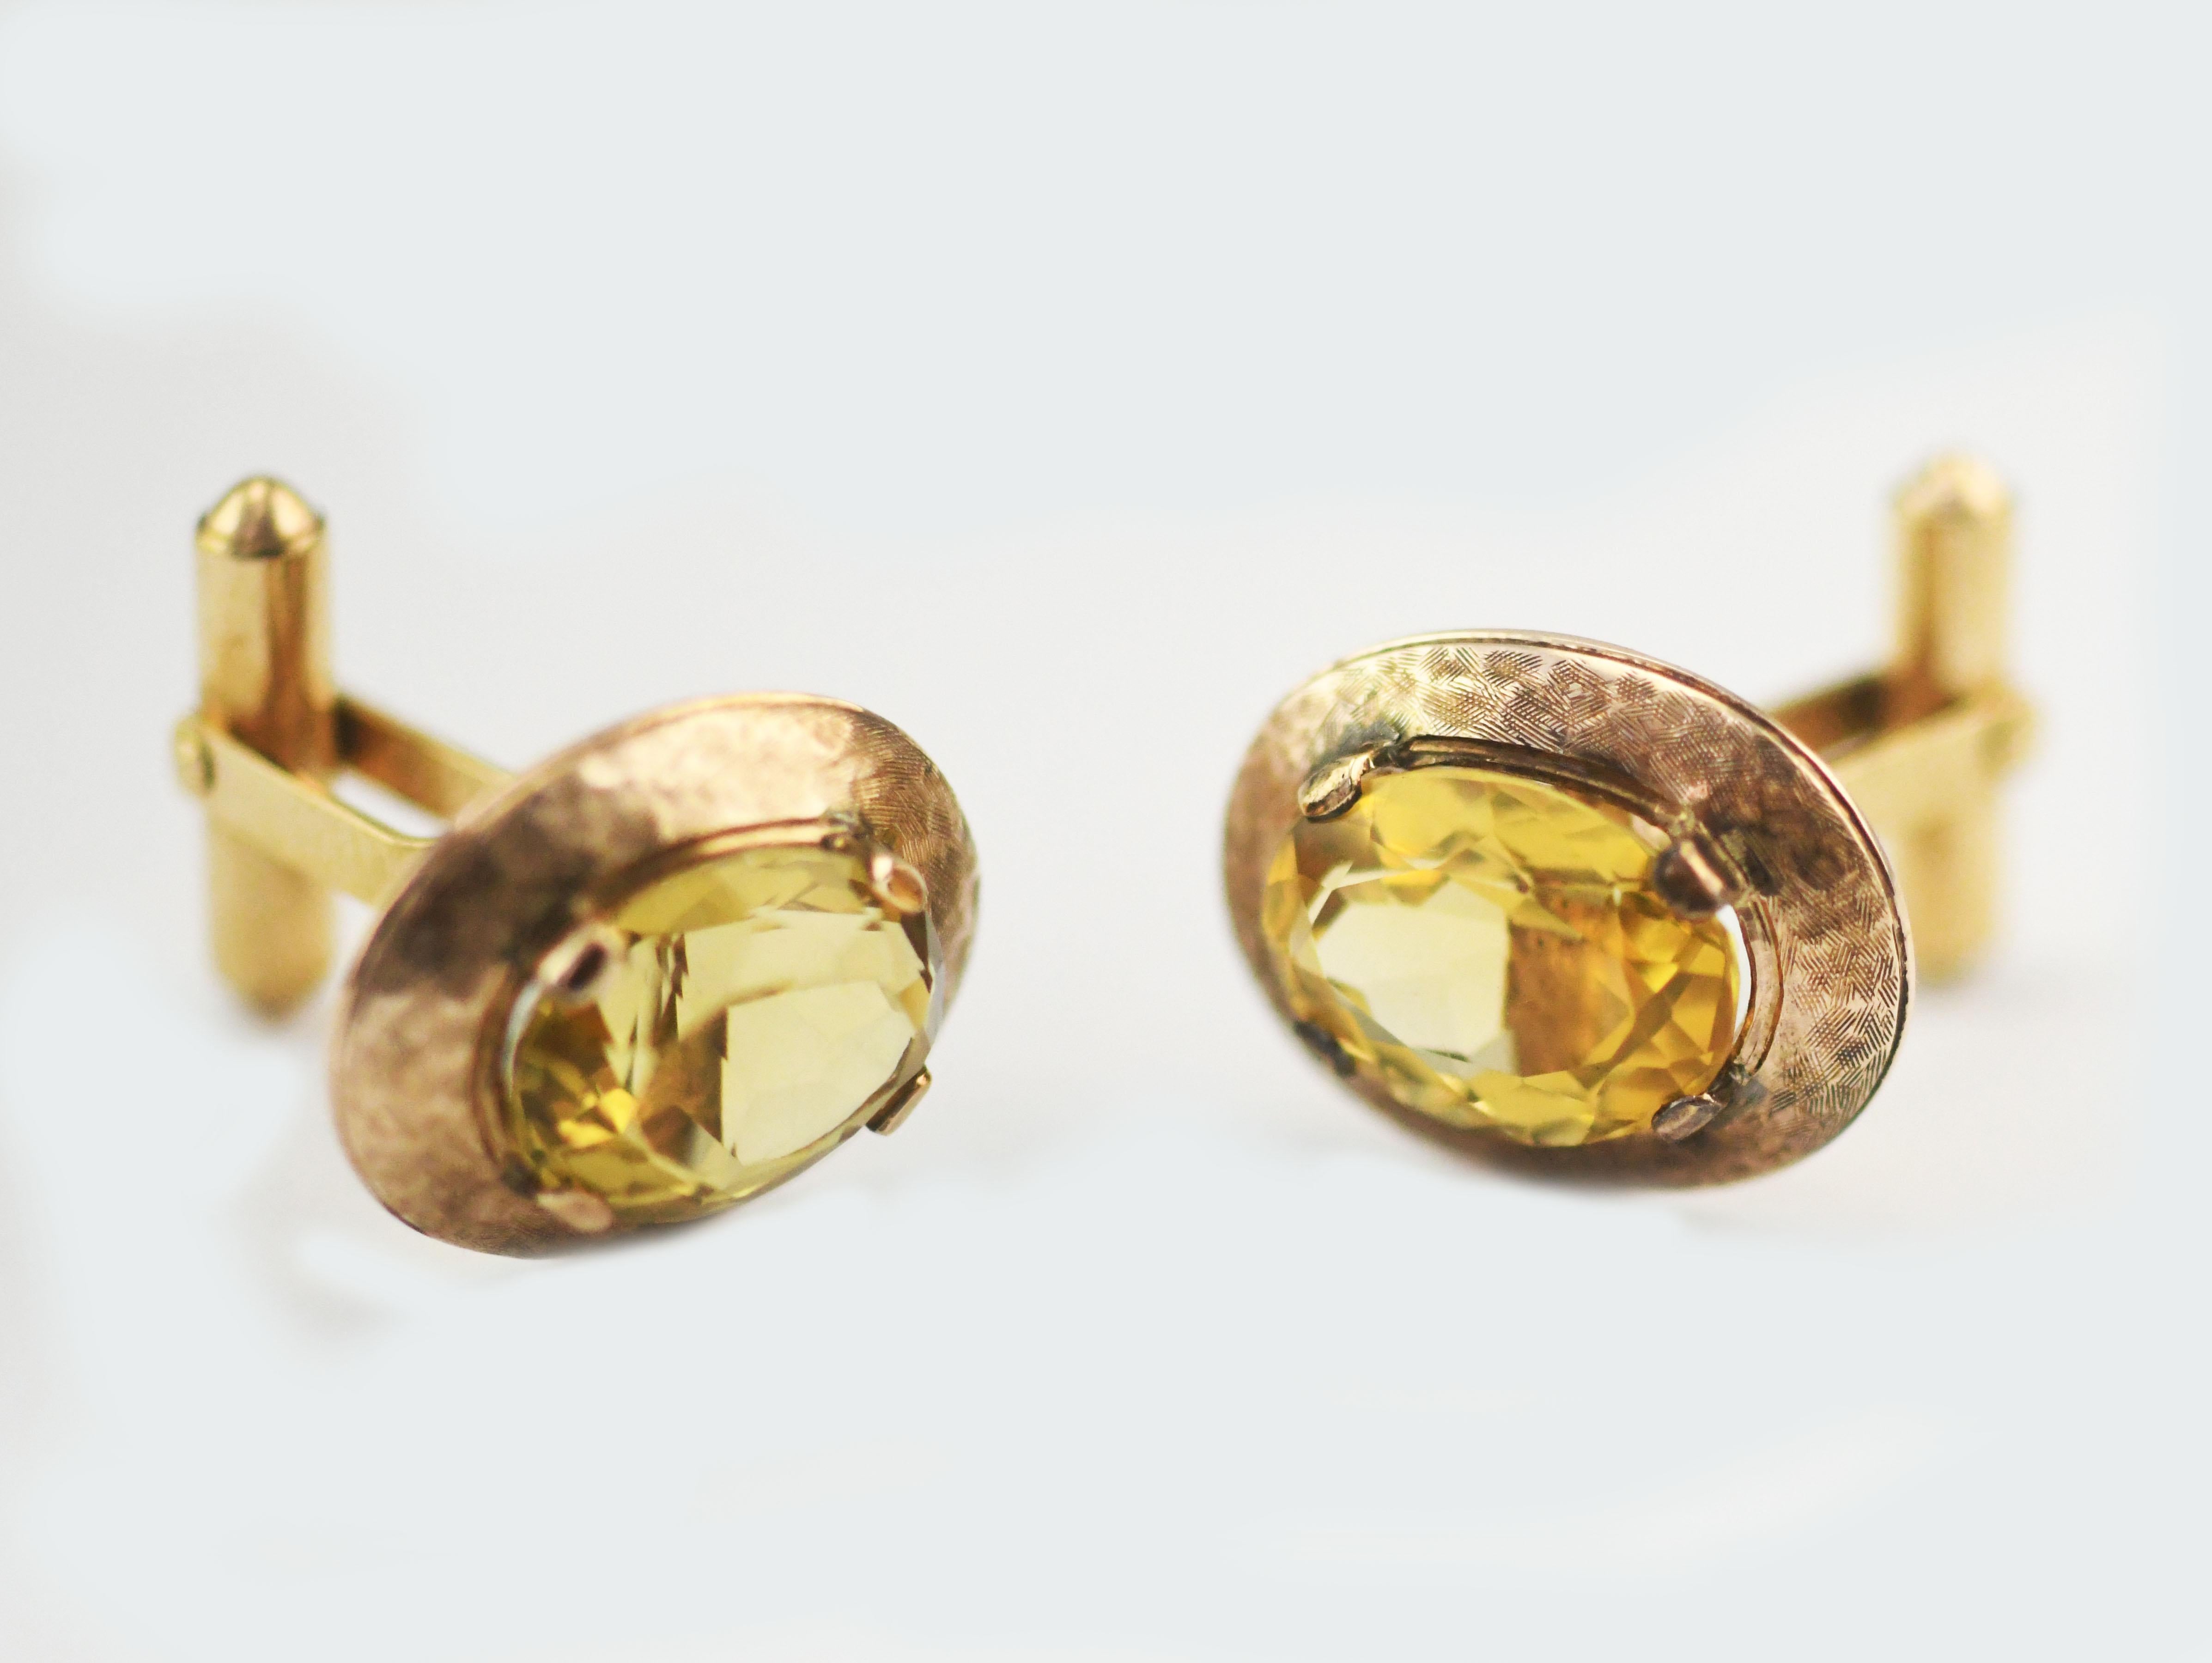 10 Karat Yellow Gold Cufflinks with Natural Yellow Citrine Stones For Sale 2